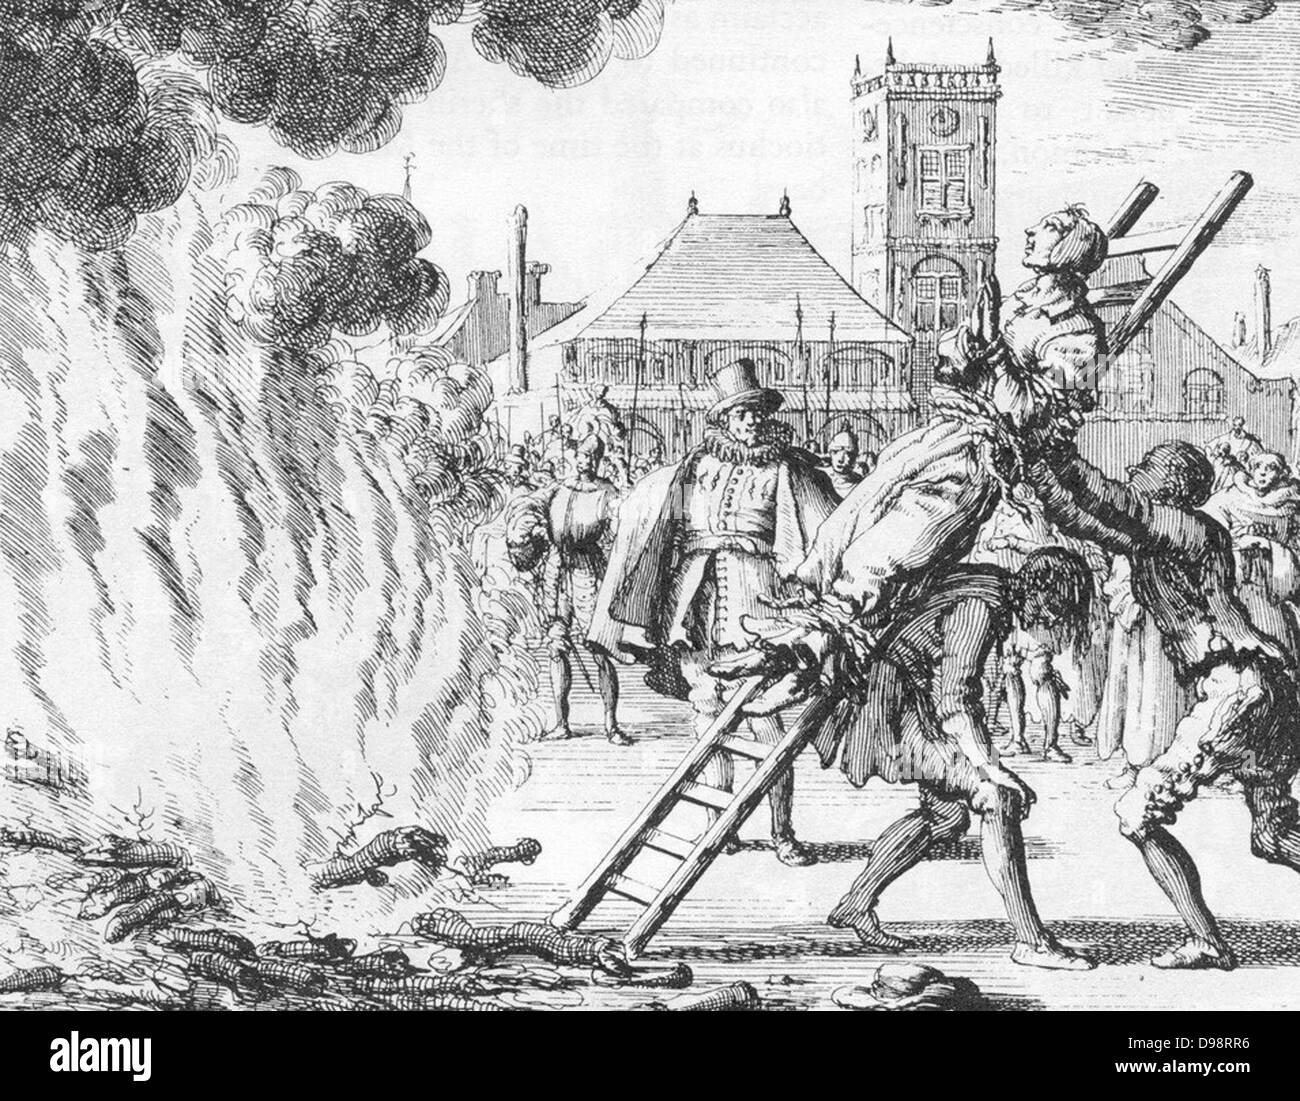 Ann Ekende Vlasteran burned alive in 1571 for the heresy of Anabaptism. From 'Mirror Martyrs', 1660. Anabaptists rejected infant baptism and practiced Believer's or Credobaptism. Religion Christian Persecution Fire Stock Photo